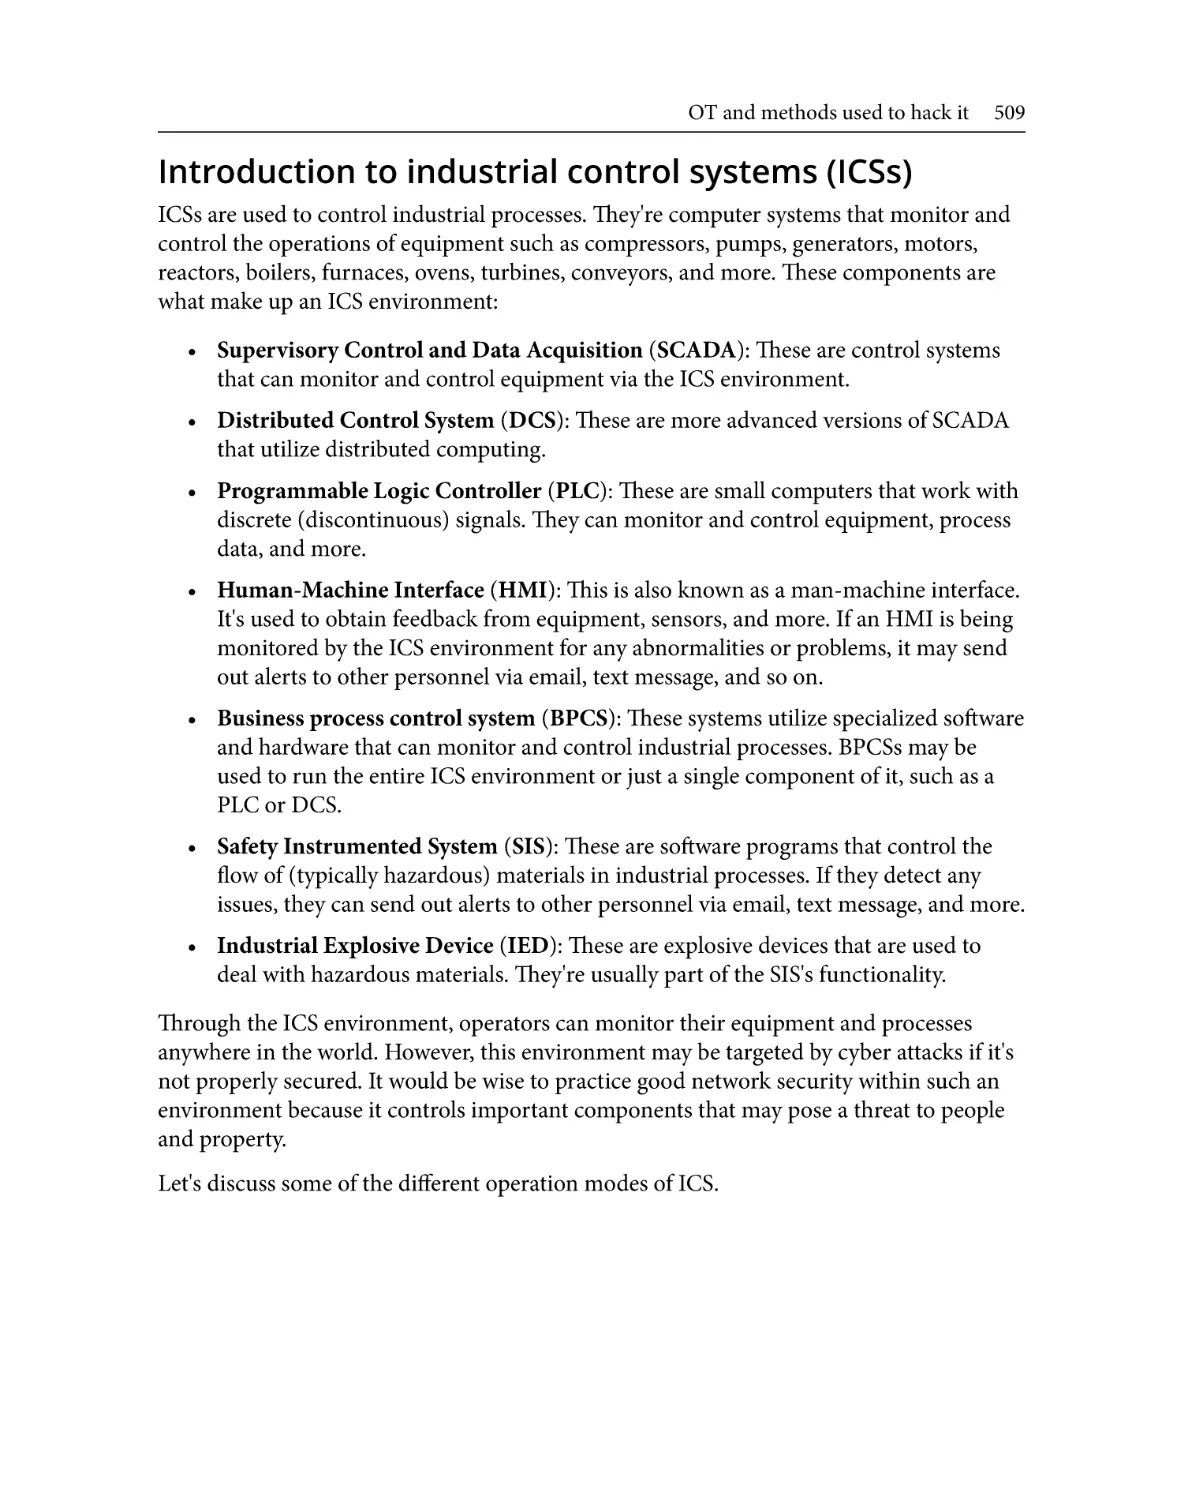 Introduction to industrial control systems (ICSs)